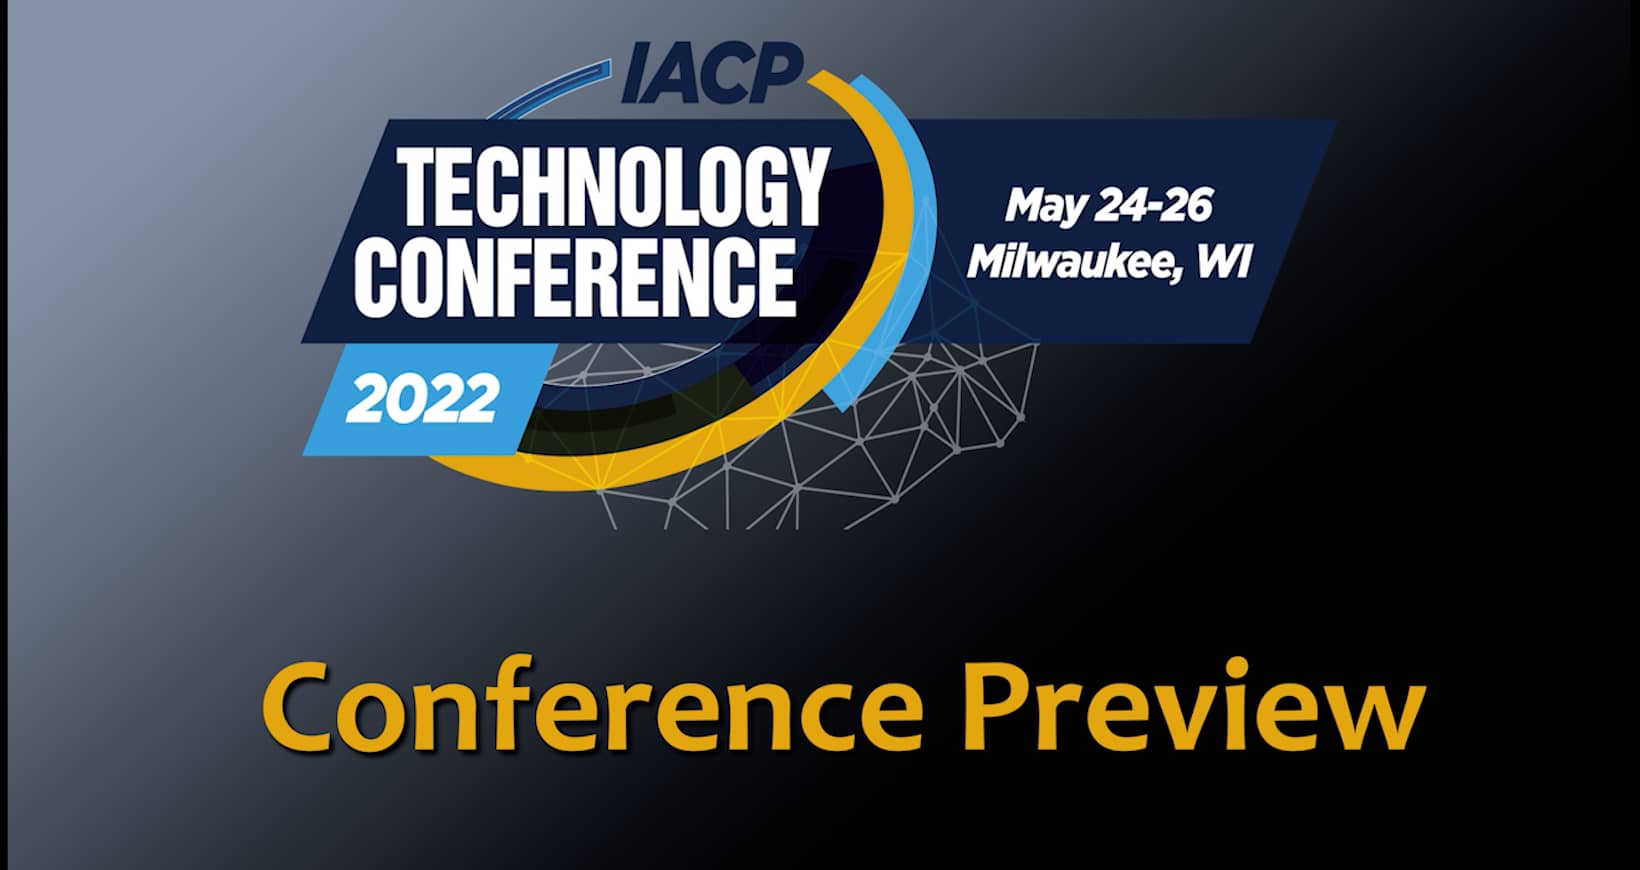 The 2022 IACP Technology Conference Preview on Vimeo